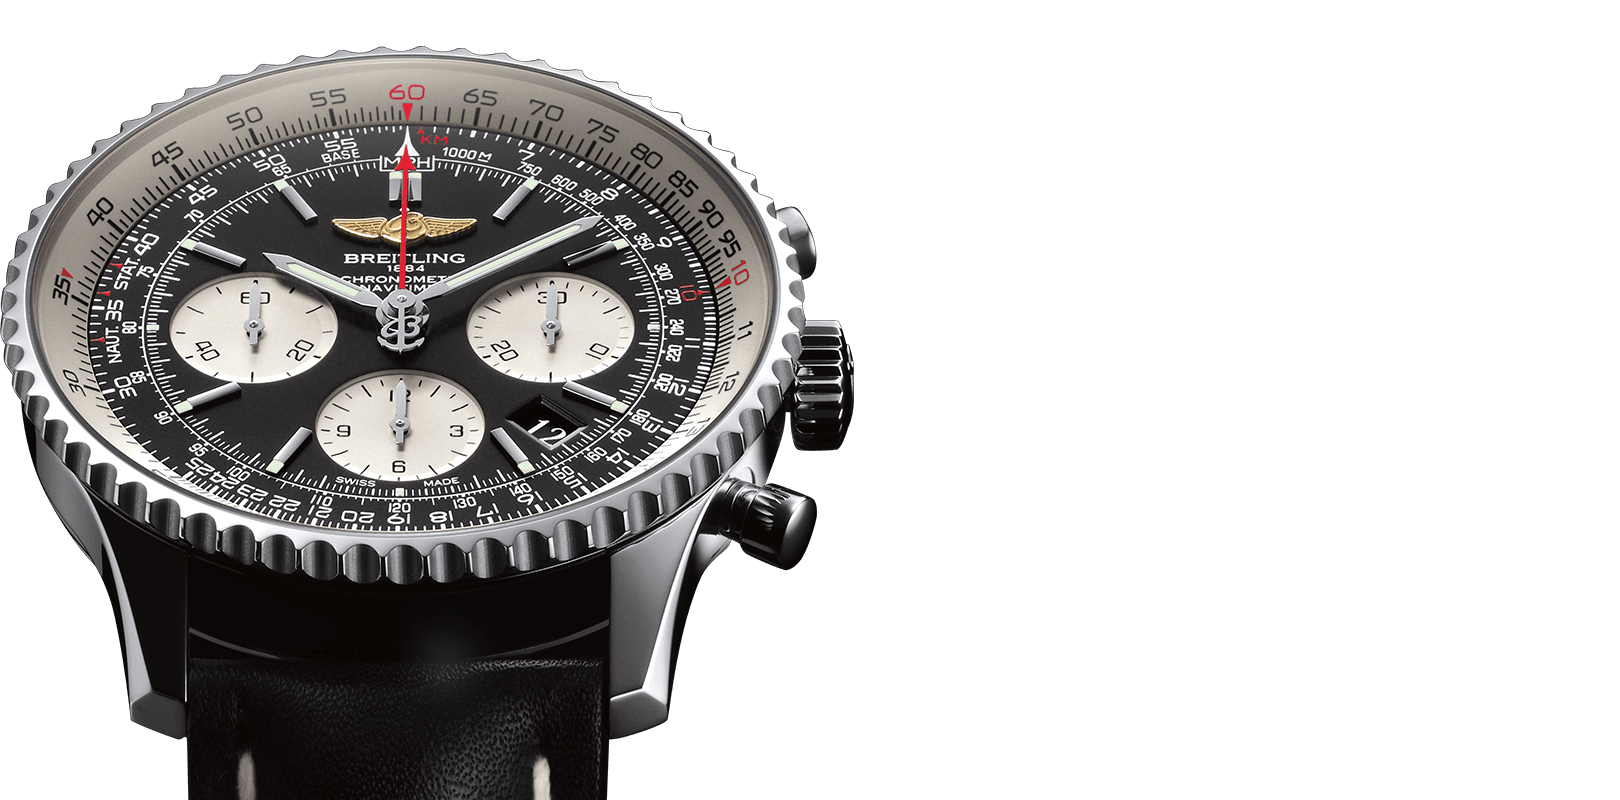 Breitling Watch breitling Navitimer in Gold and Steel Reference: 81610 Circa 1990Bretlin Navitimer